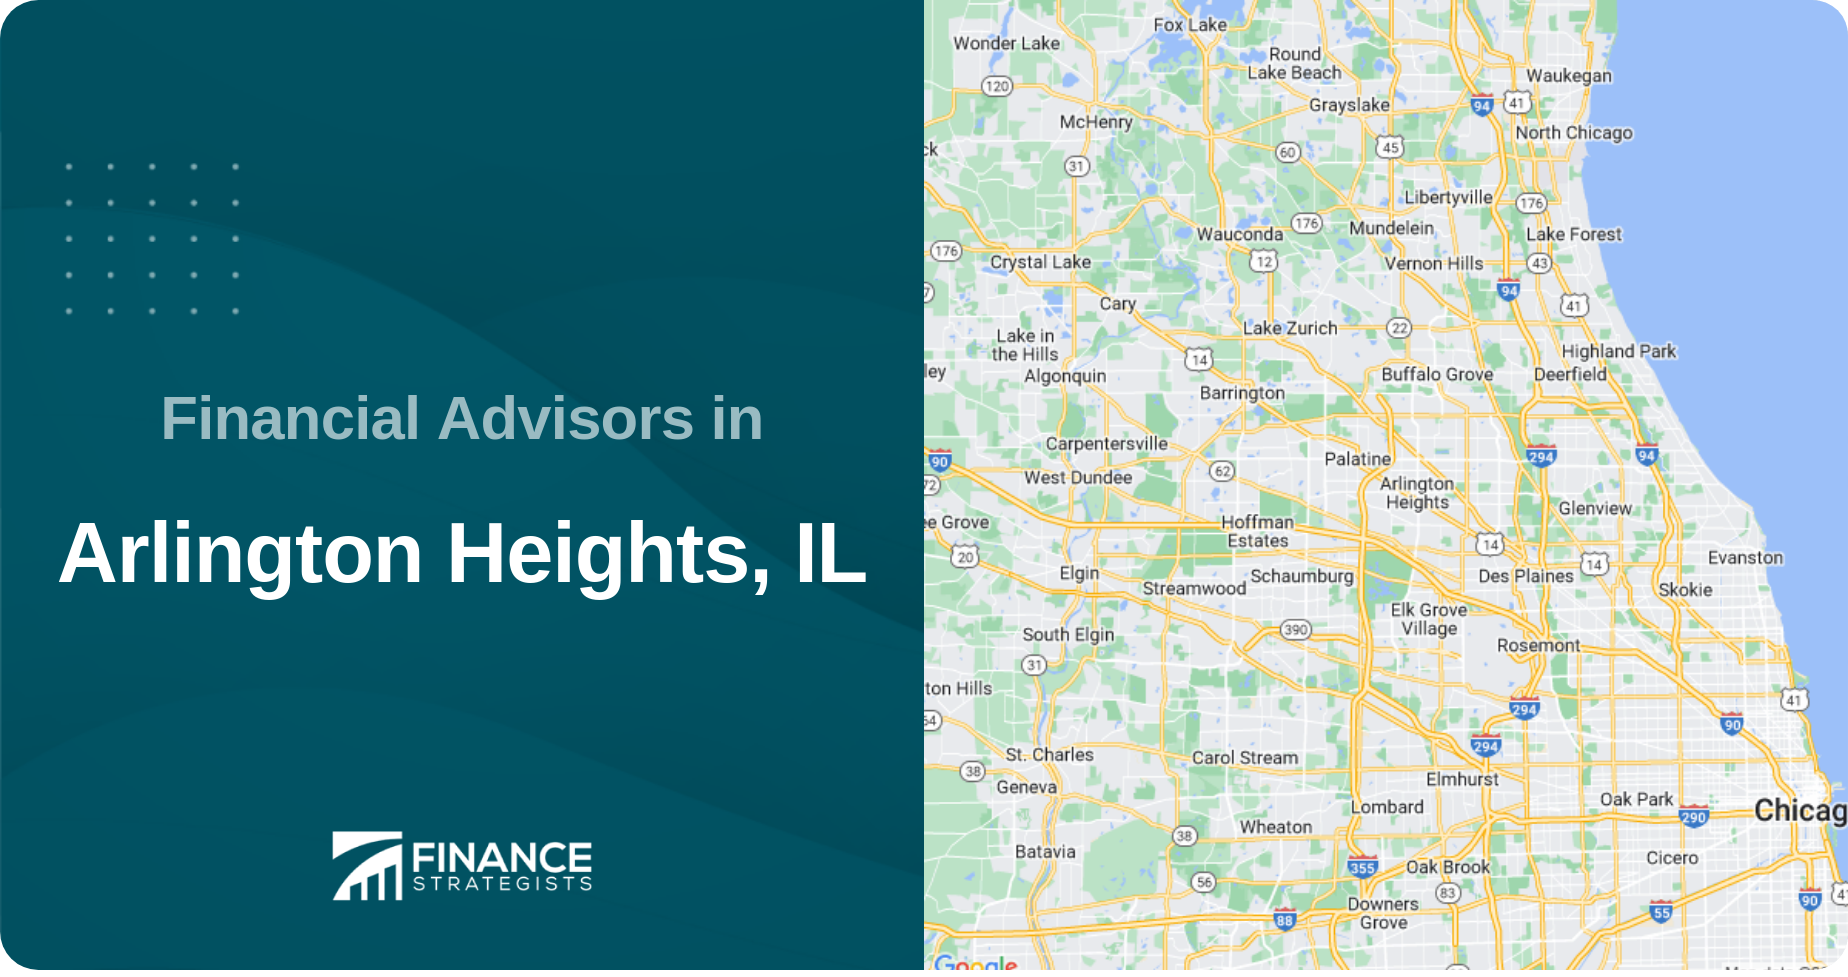 Financial Advisors in Arlington Heights, IL